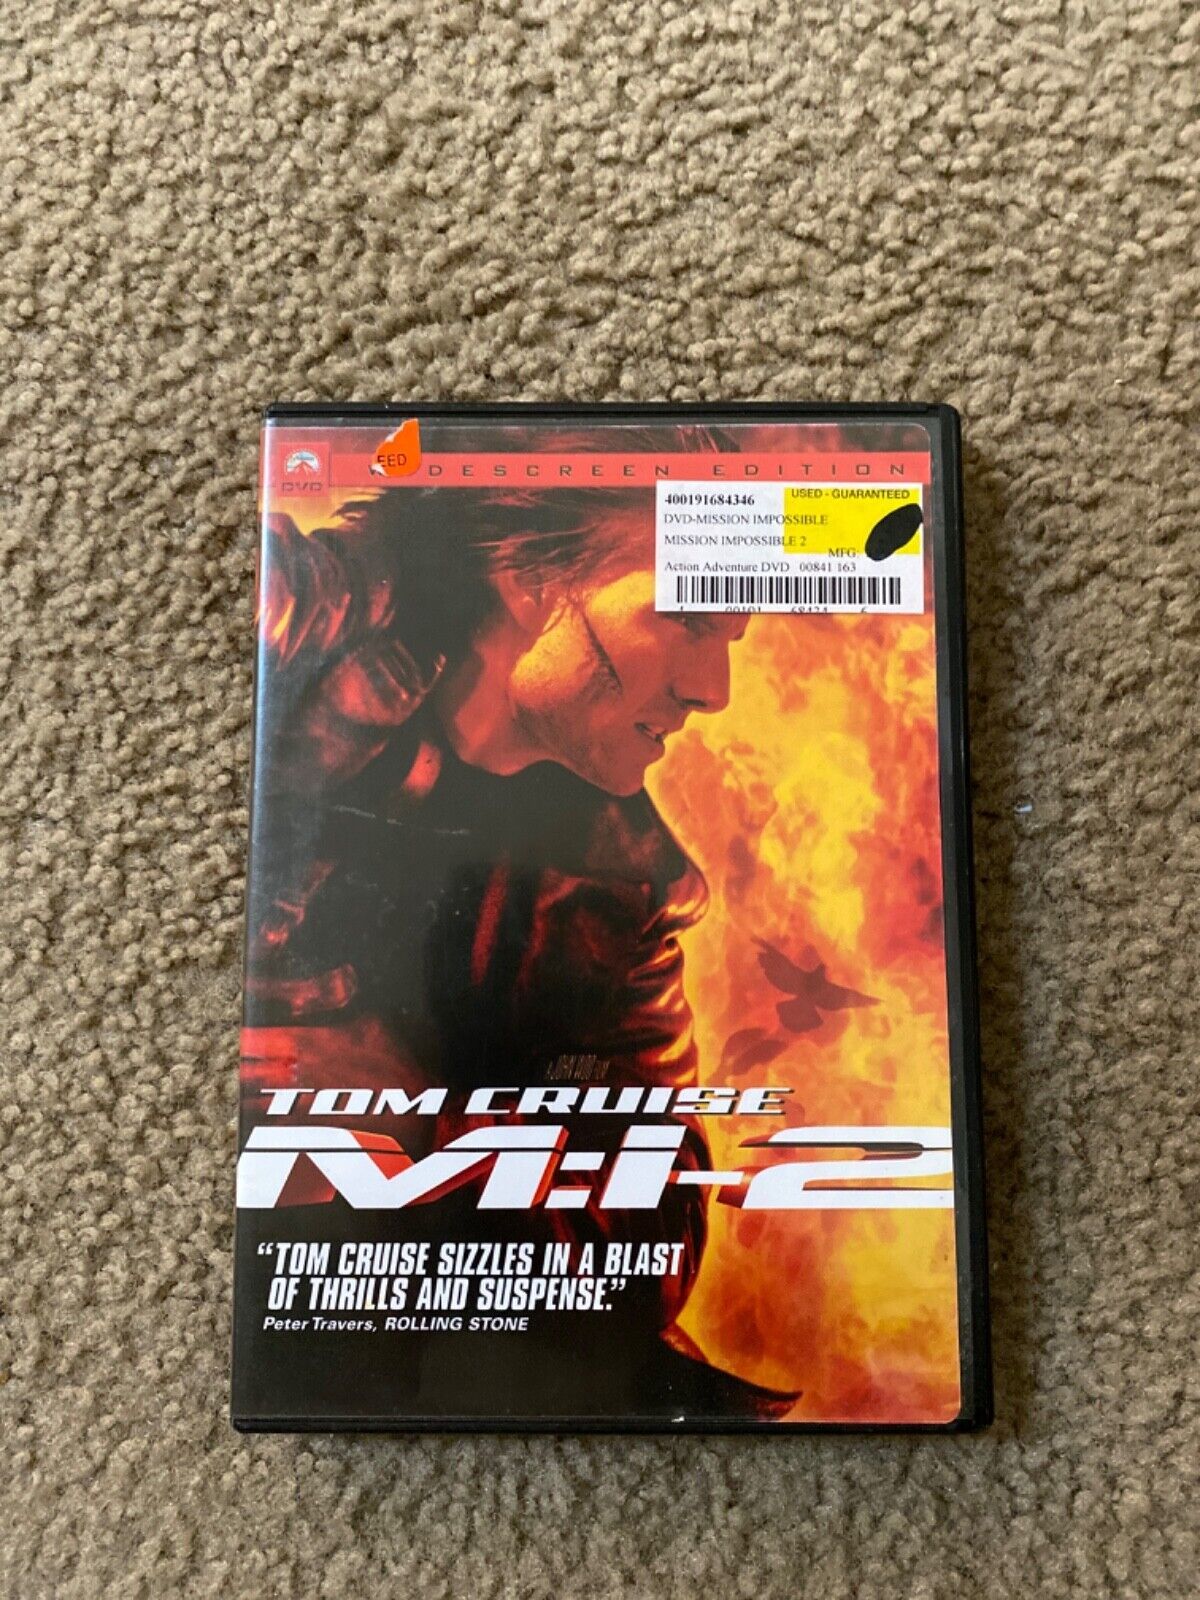 Primary image for Mission: Impossible II (DVD, 2000) Tom Cruise